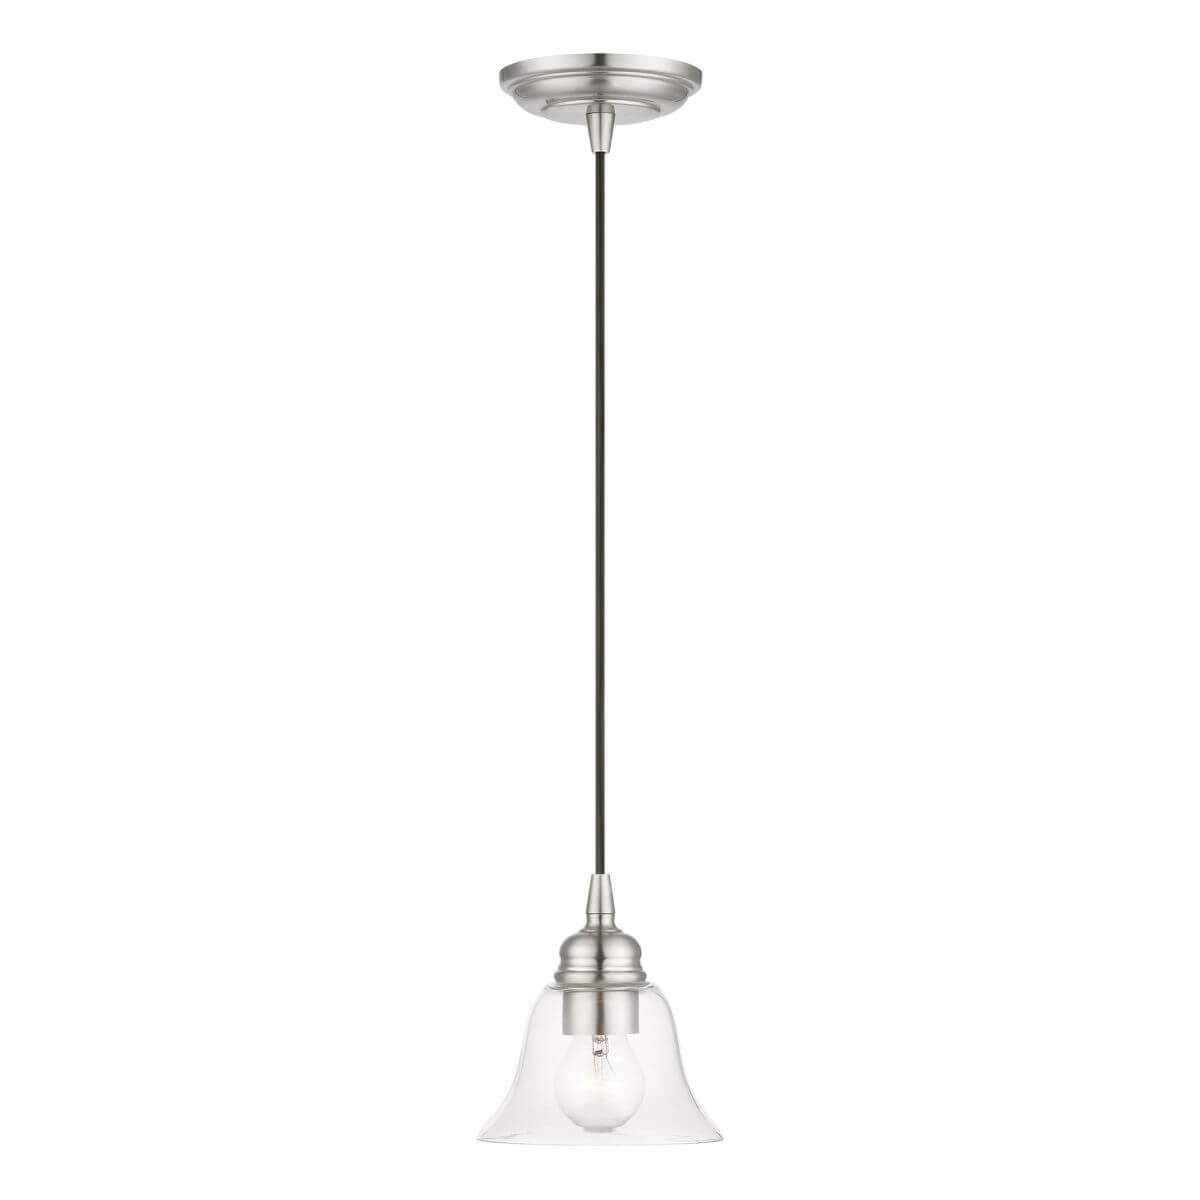 Livex 46480-91 Moreland 1 Light 6 inch Pendant in Brushed Nickel with Hand Blown Clear Glass